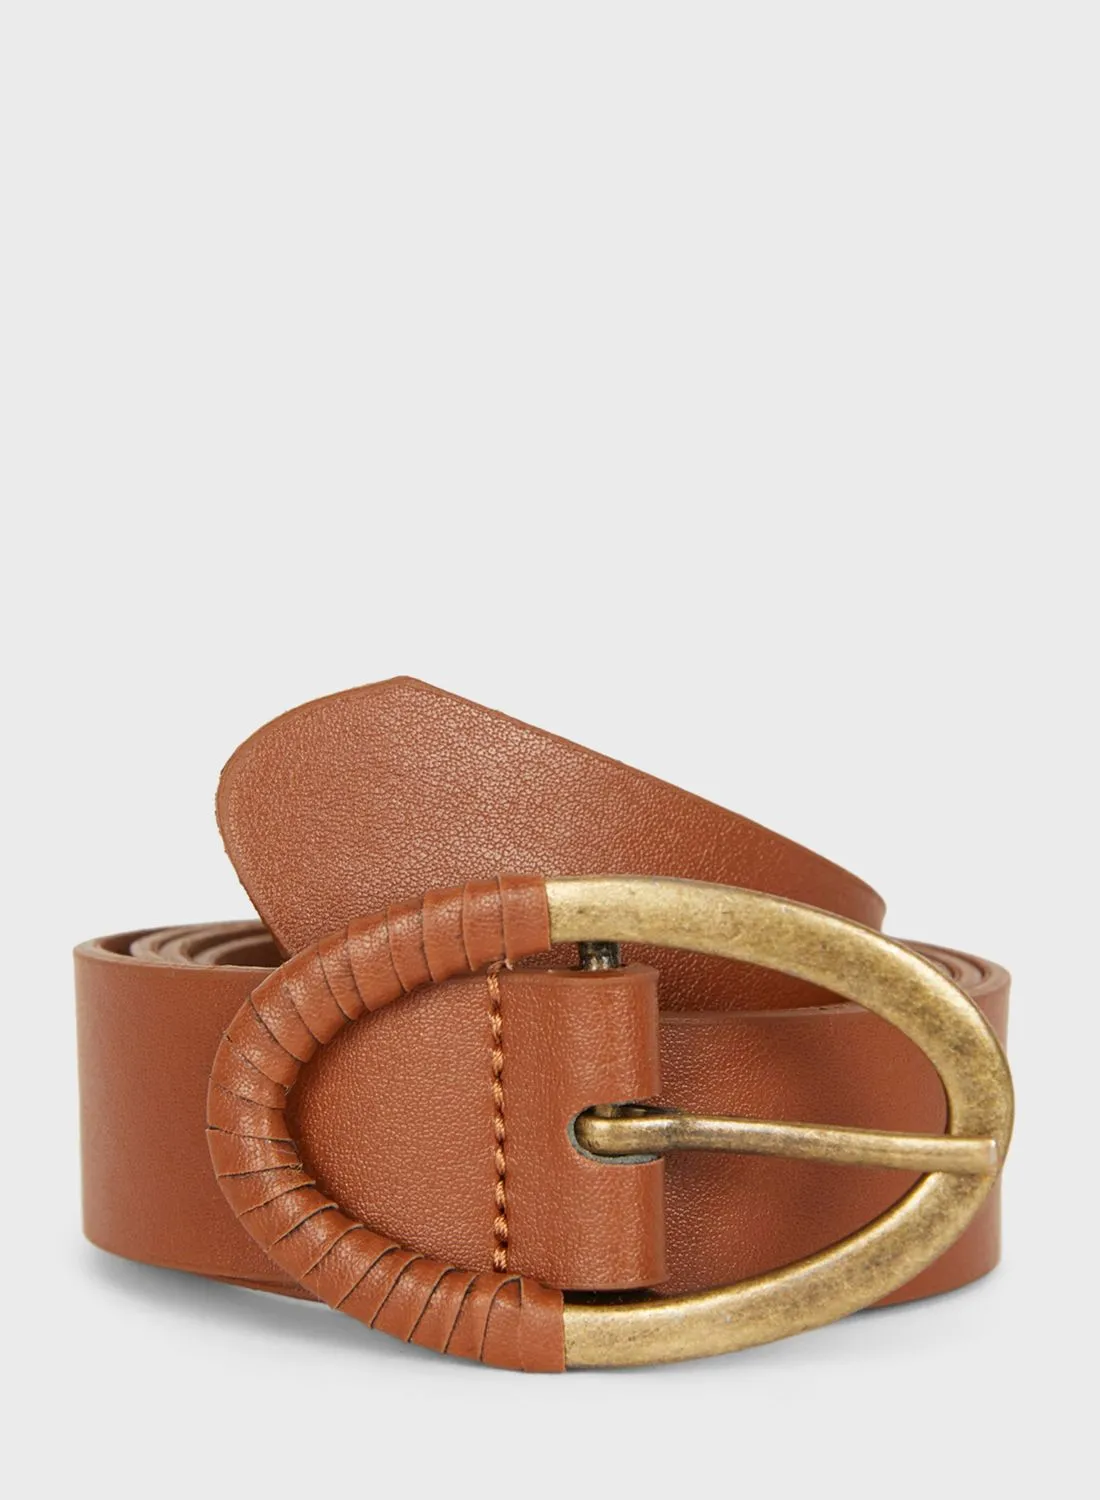 DeFacto Buckle Allocated Hole Belt